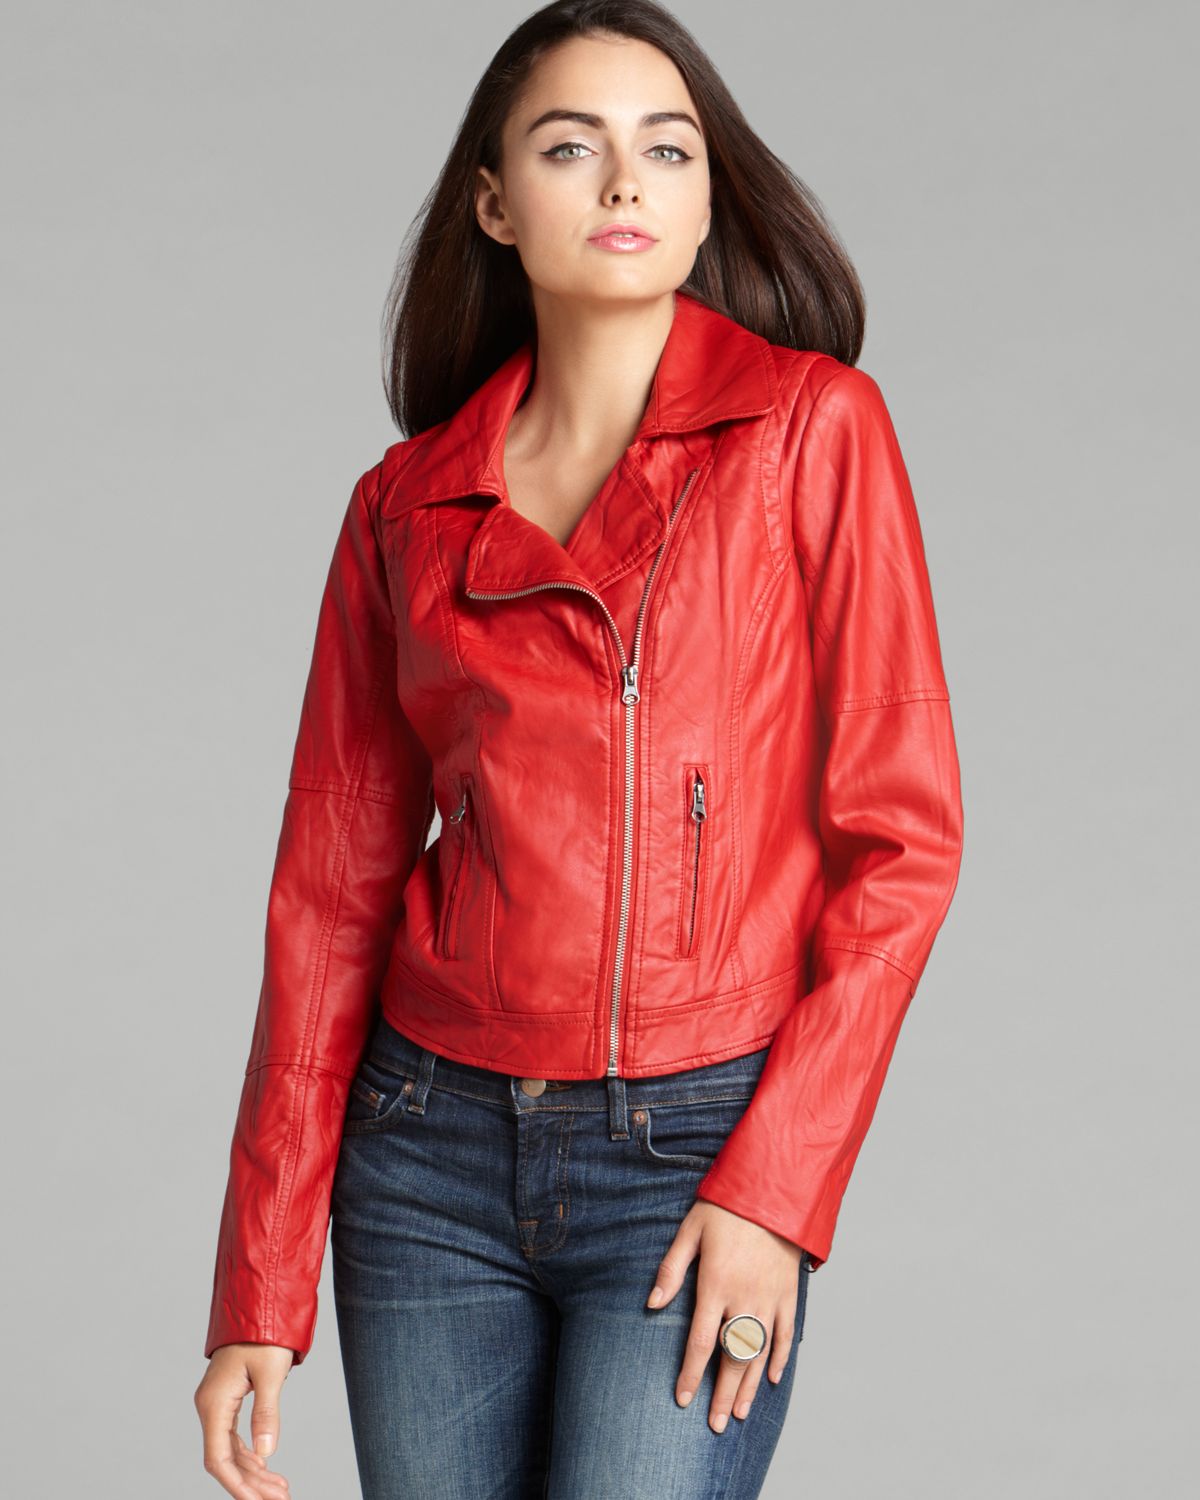 Lyst - Guess Jacket Carly Faux Leather Moto in Red